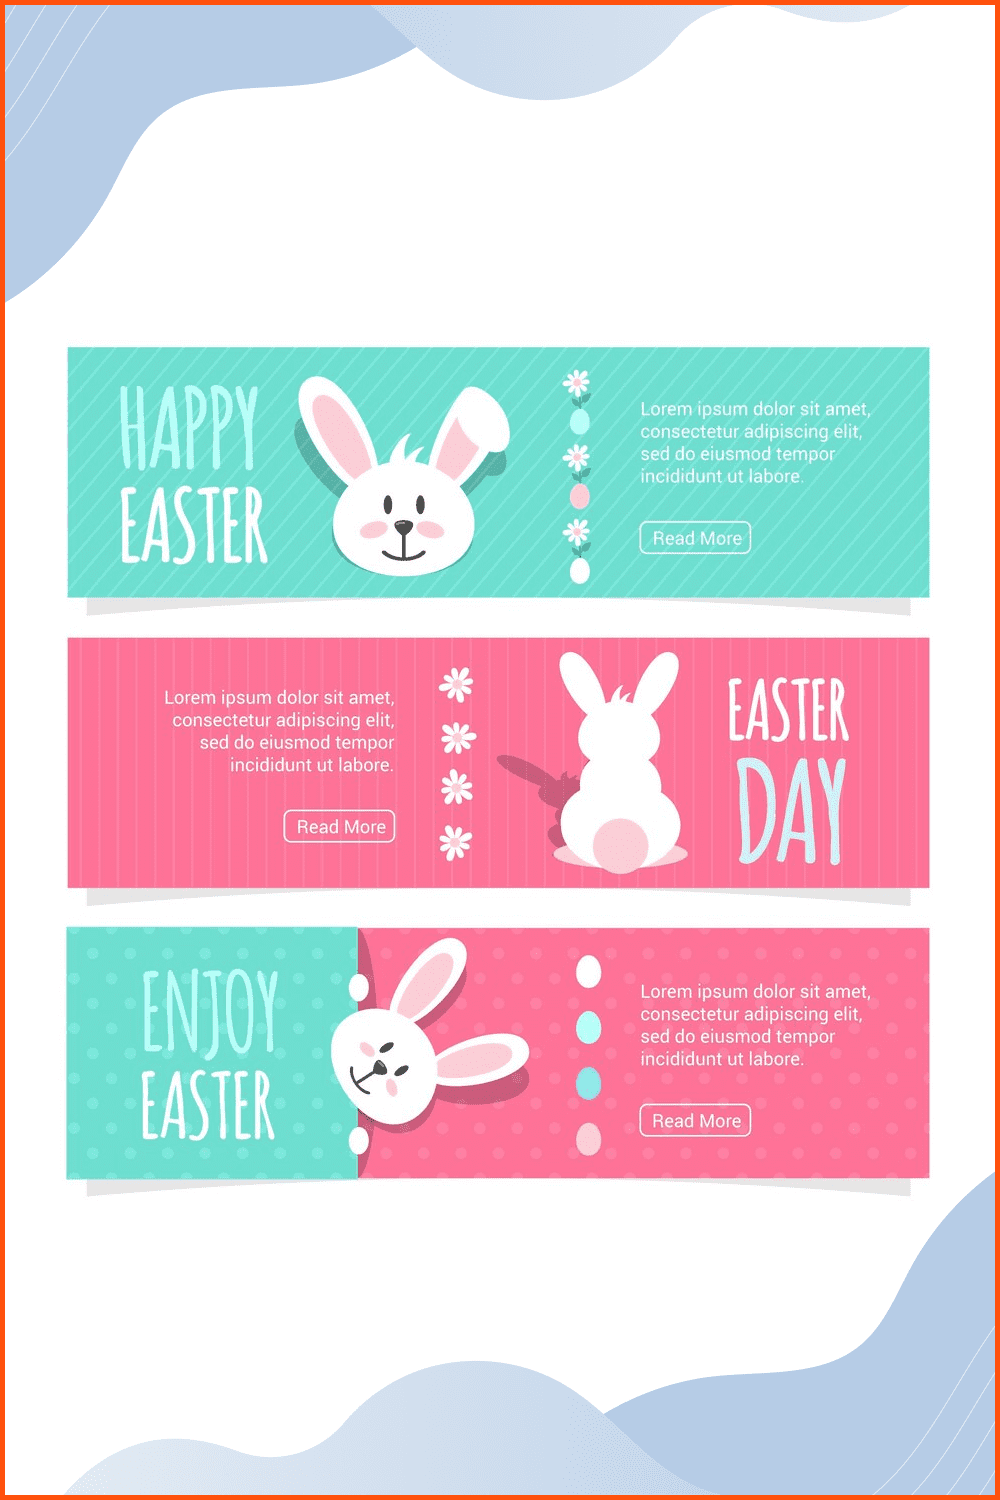 Easter day banners.